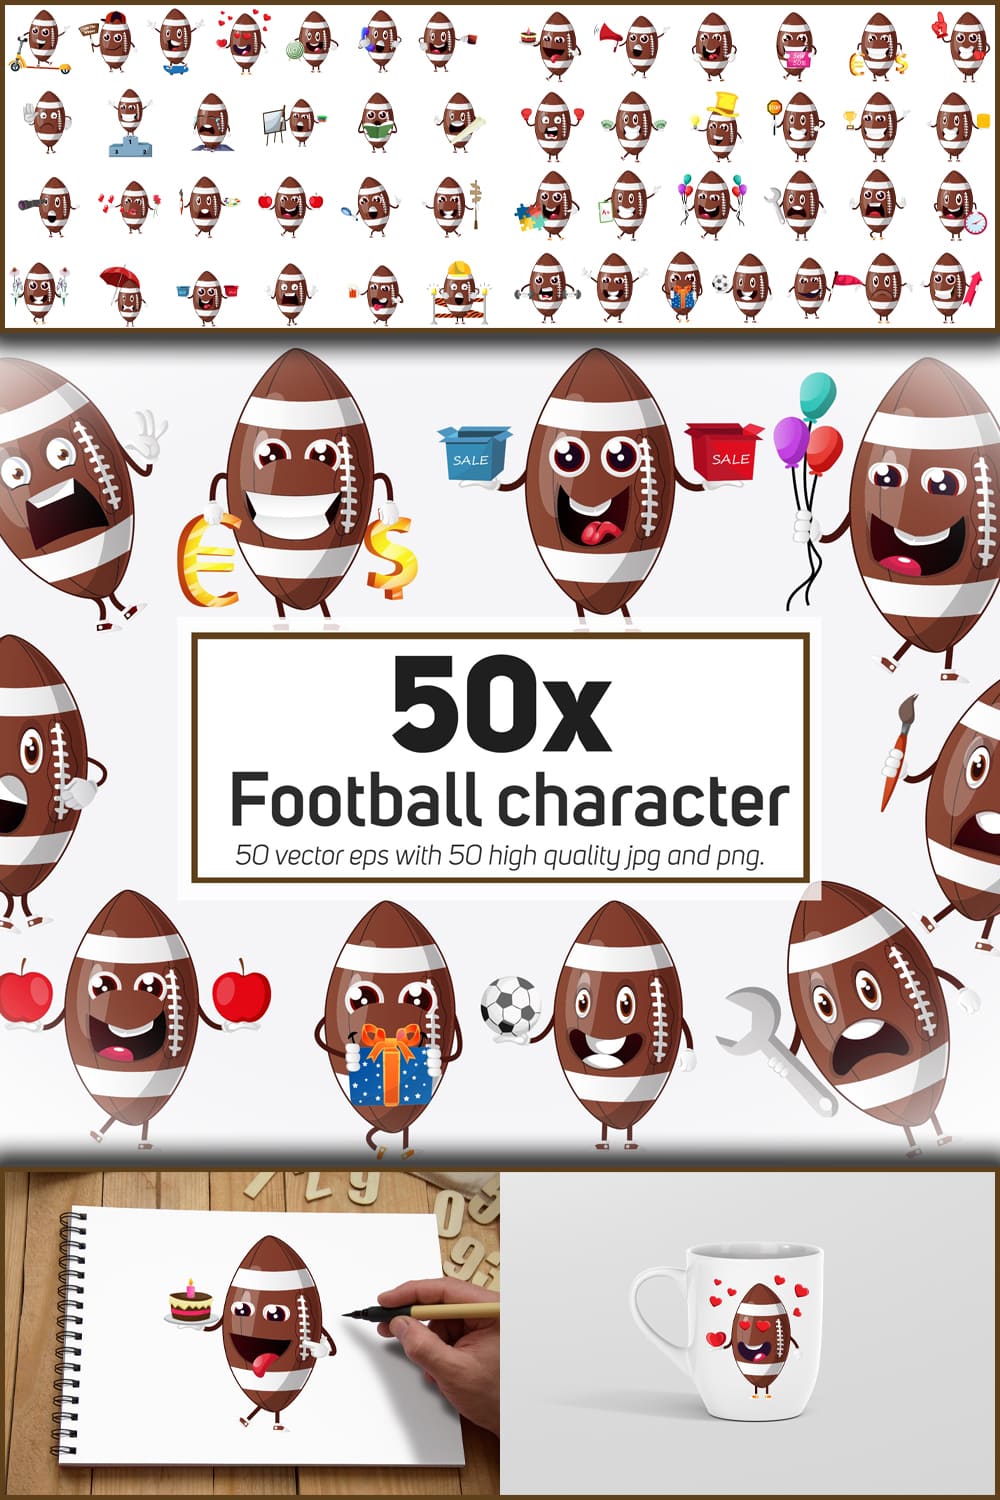 Football mascot or character in different situ of pinterest.